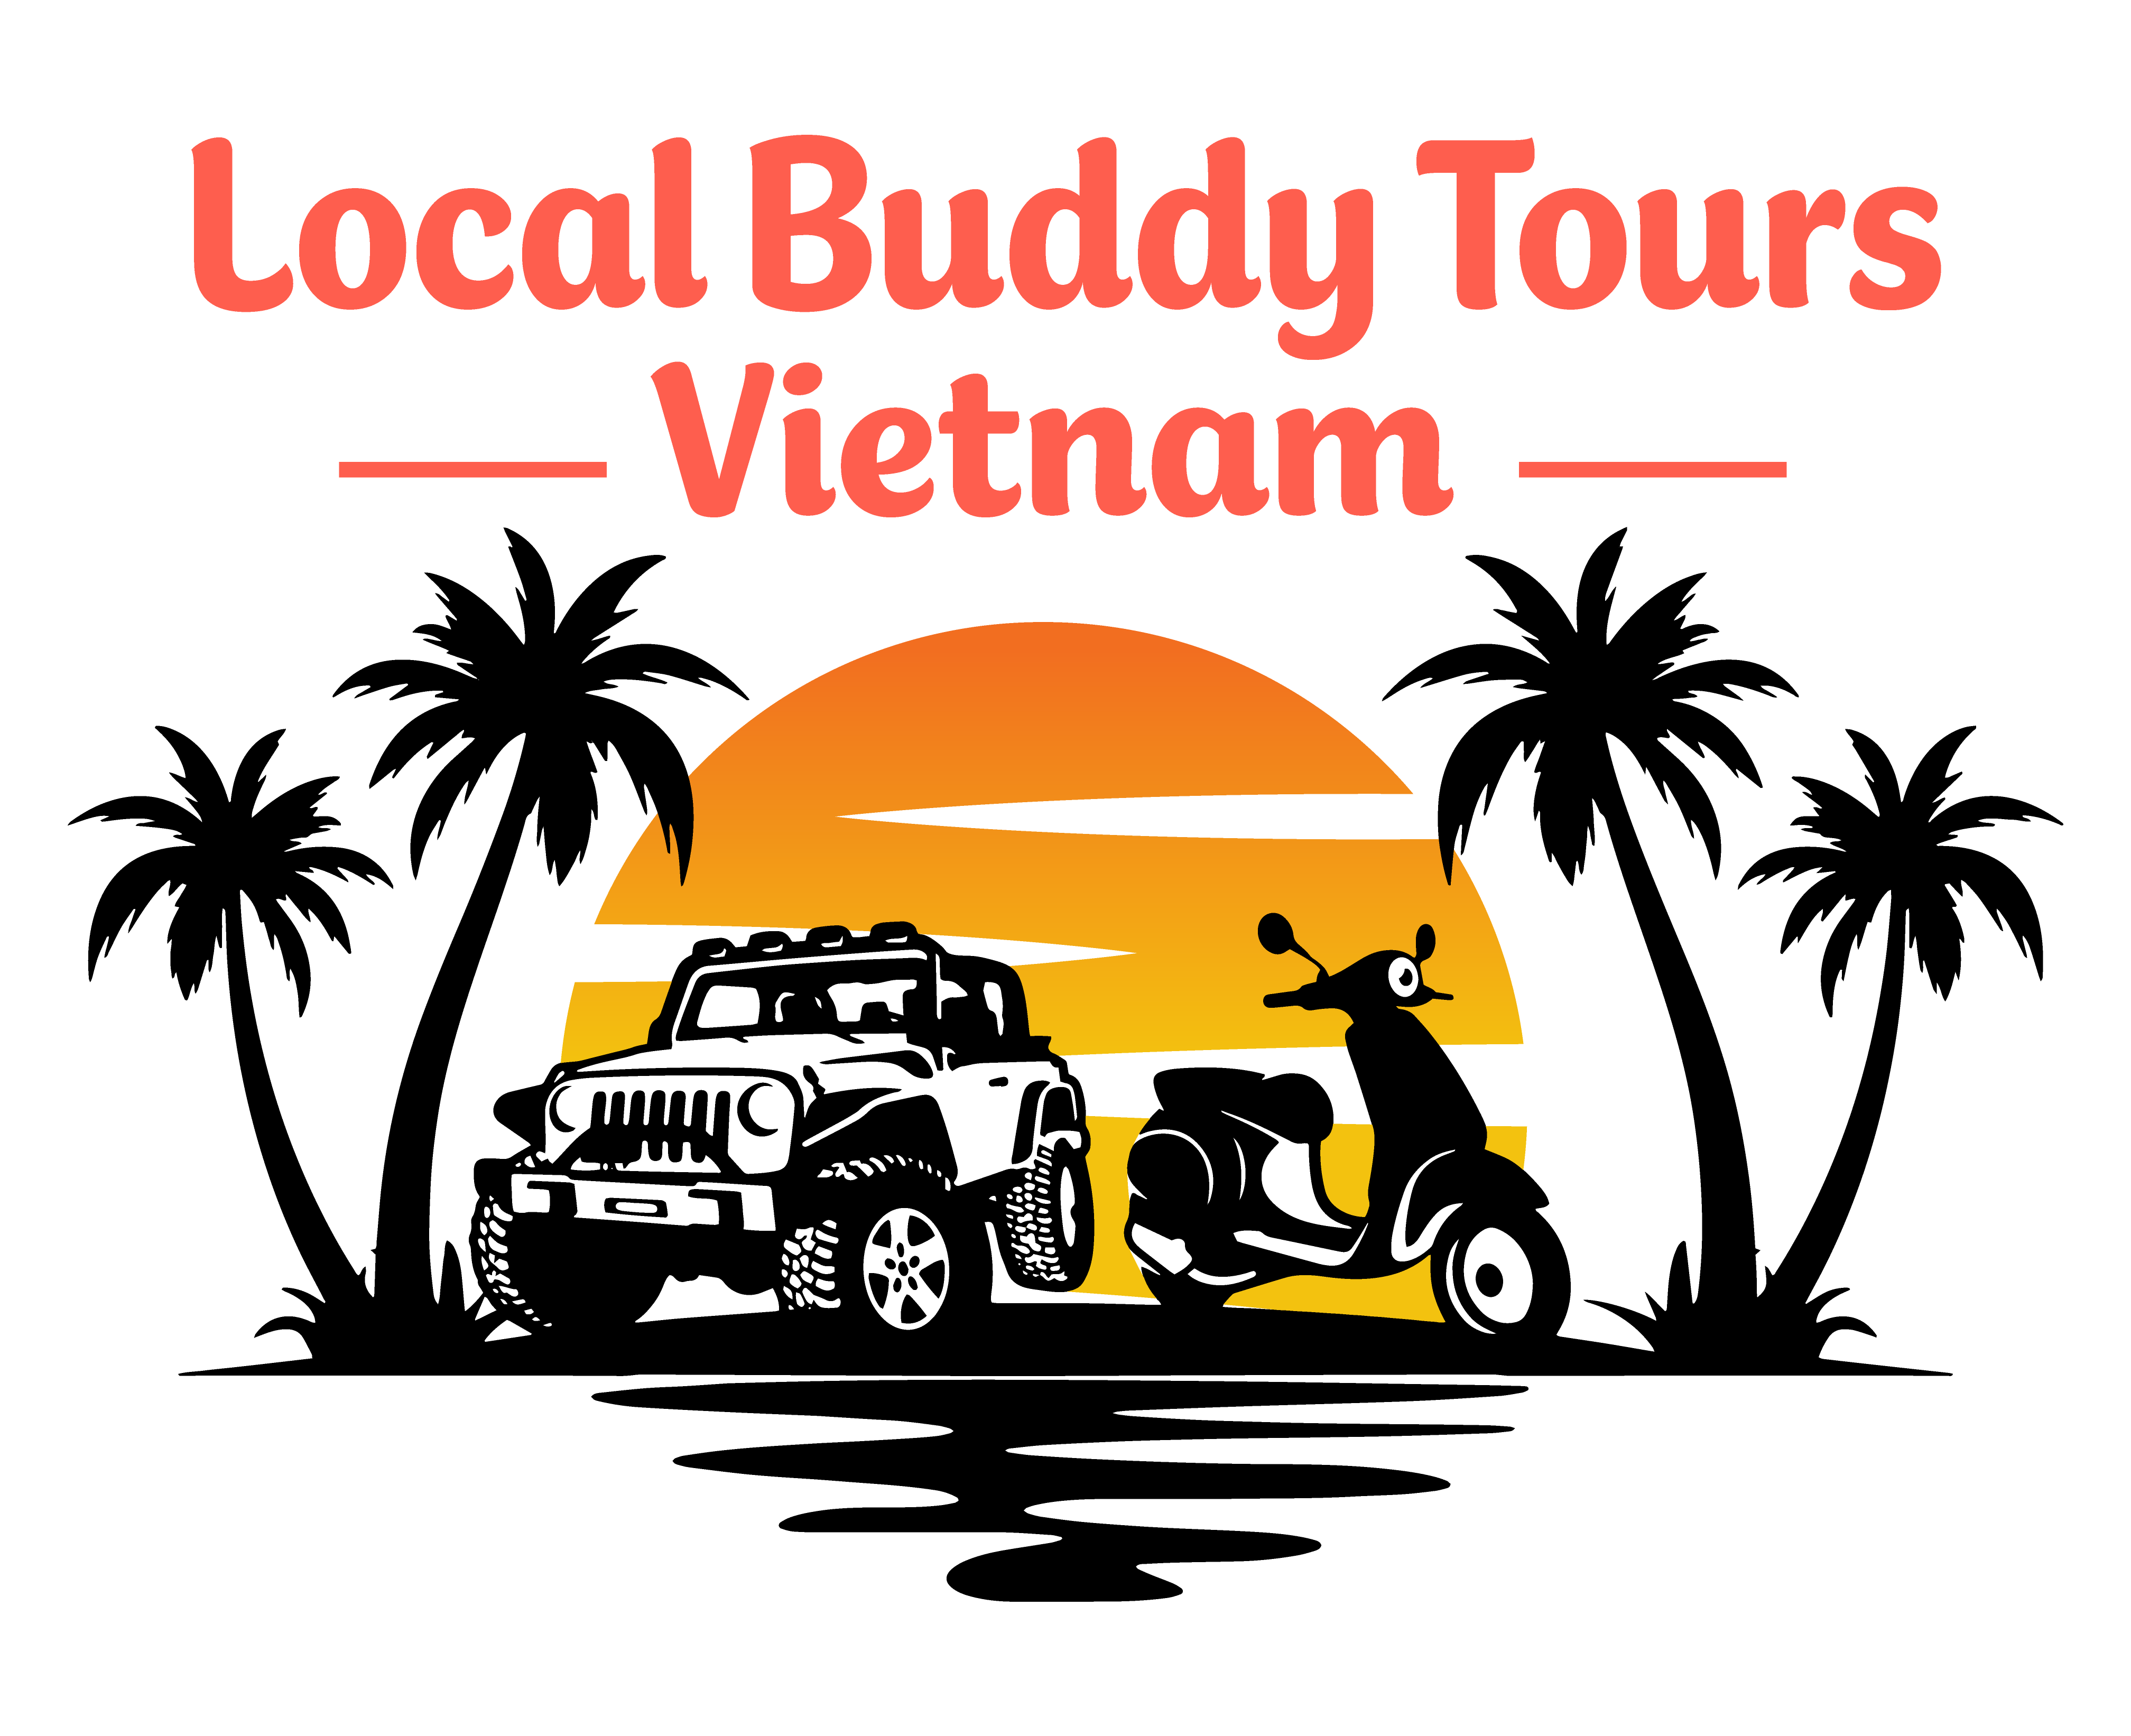 Local Buddy Tours